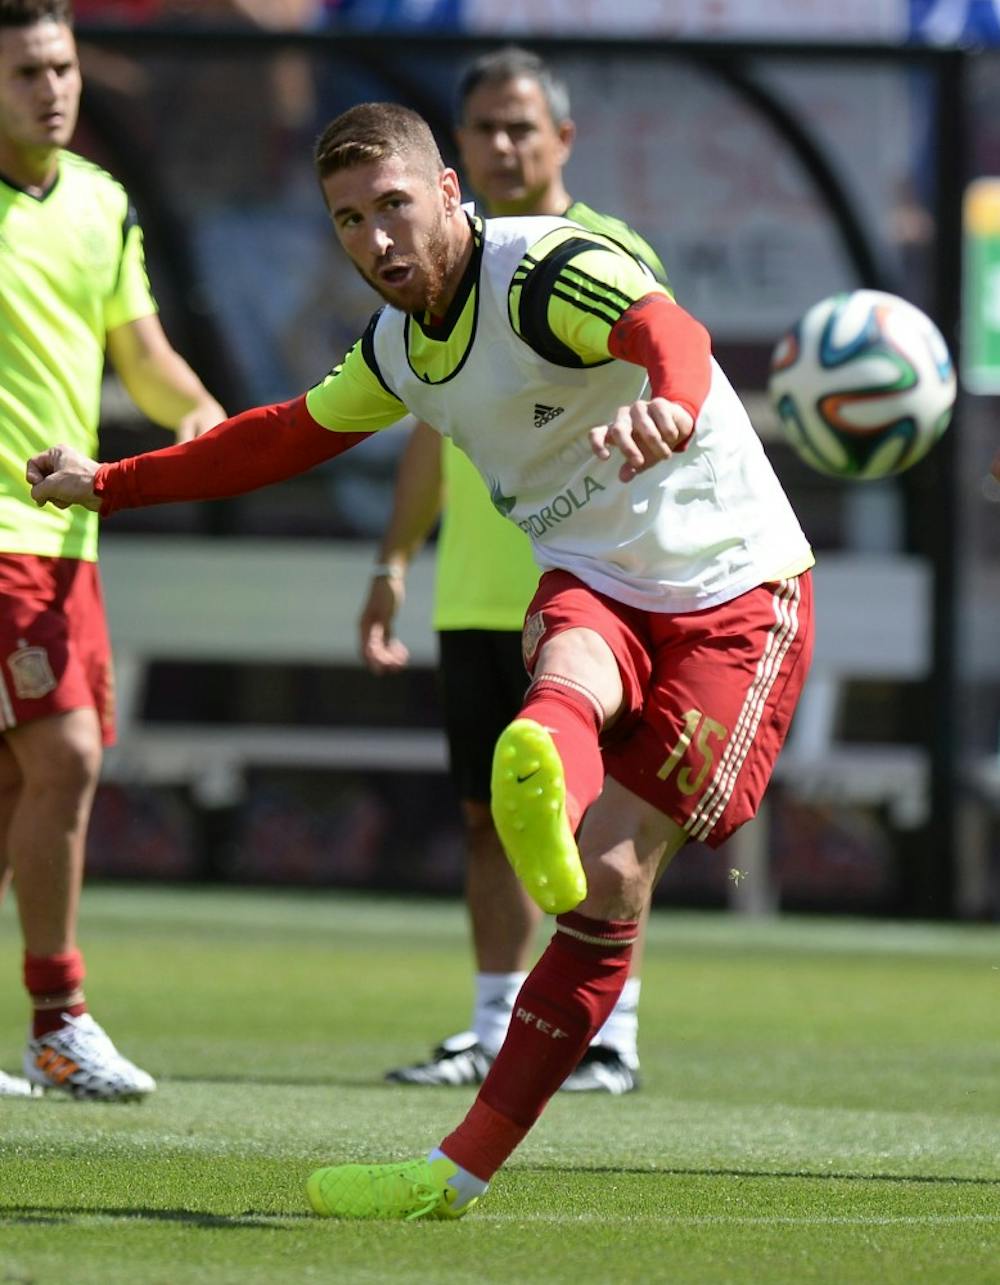 Spain defender Sergio Ramos (15) warms up before an international friendly against El Salvador at FedEx Field in Landover, Md., Saturday, June 7, 2014. (Chuck Myers/MCT)